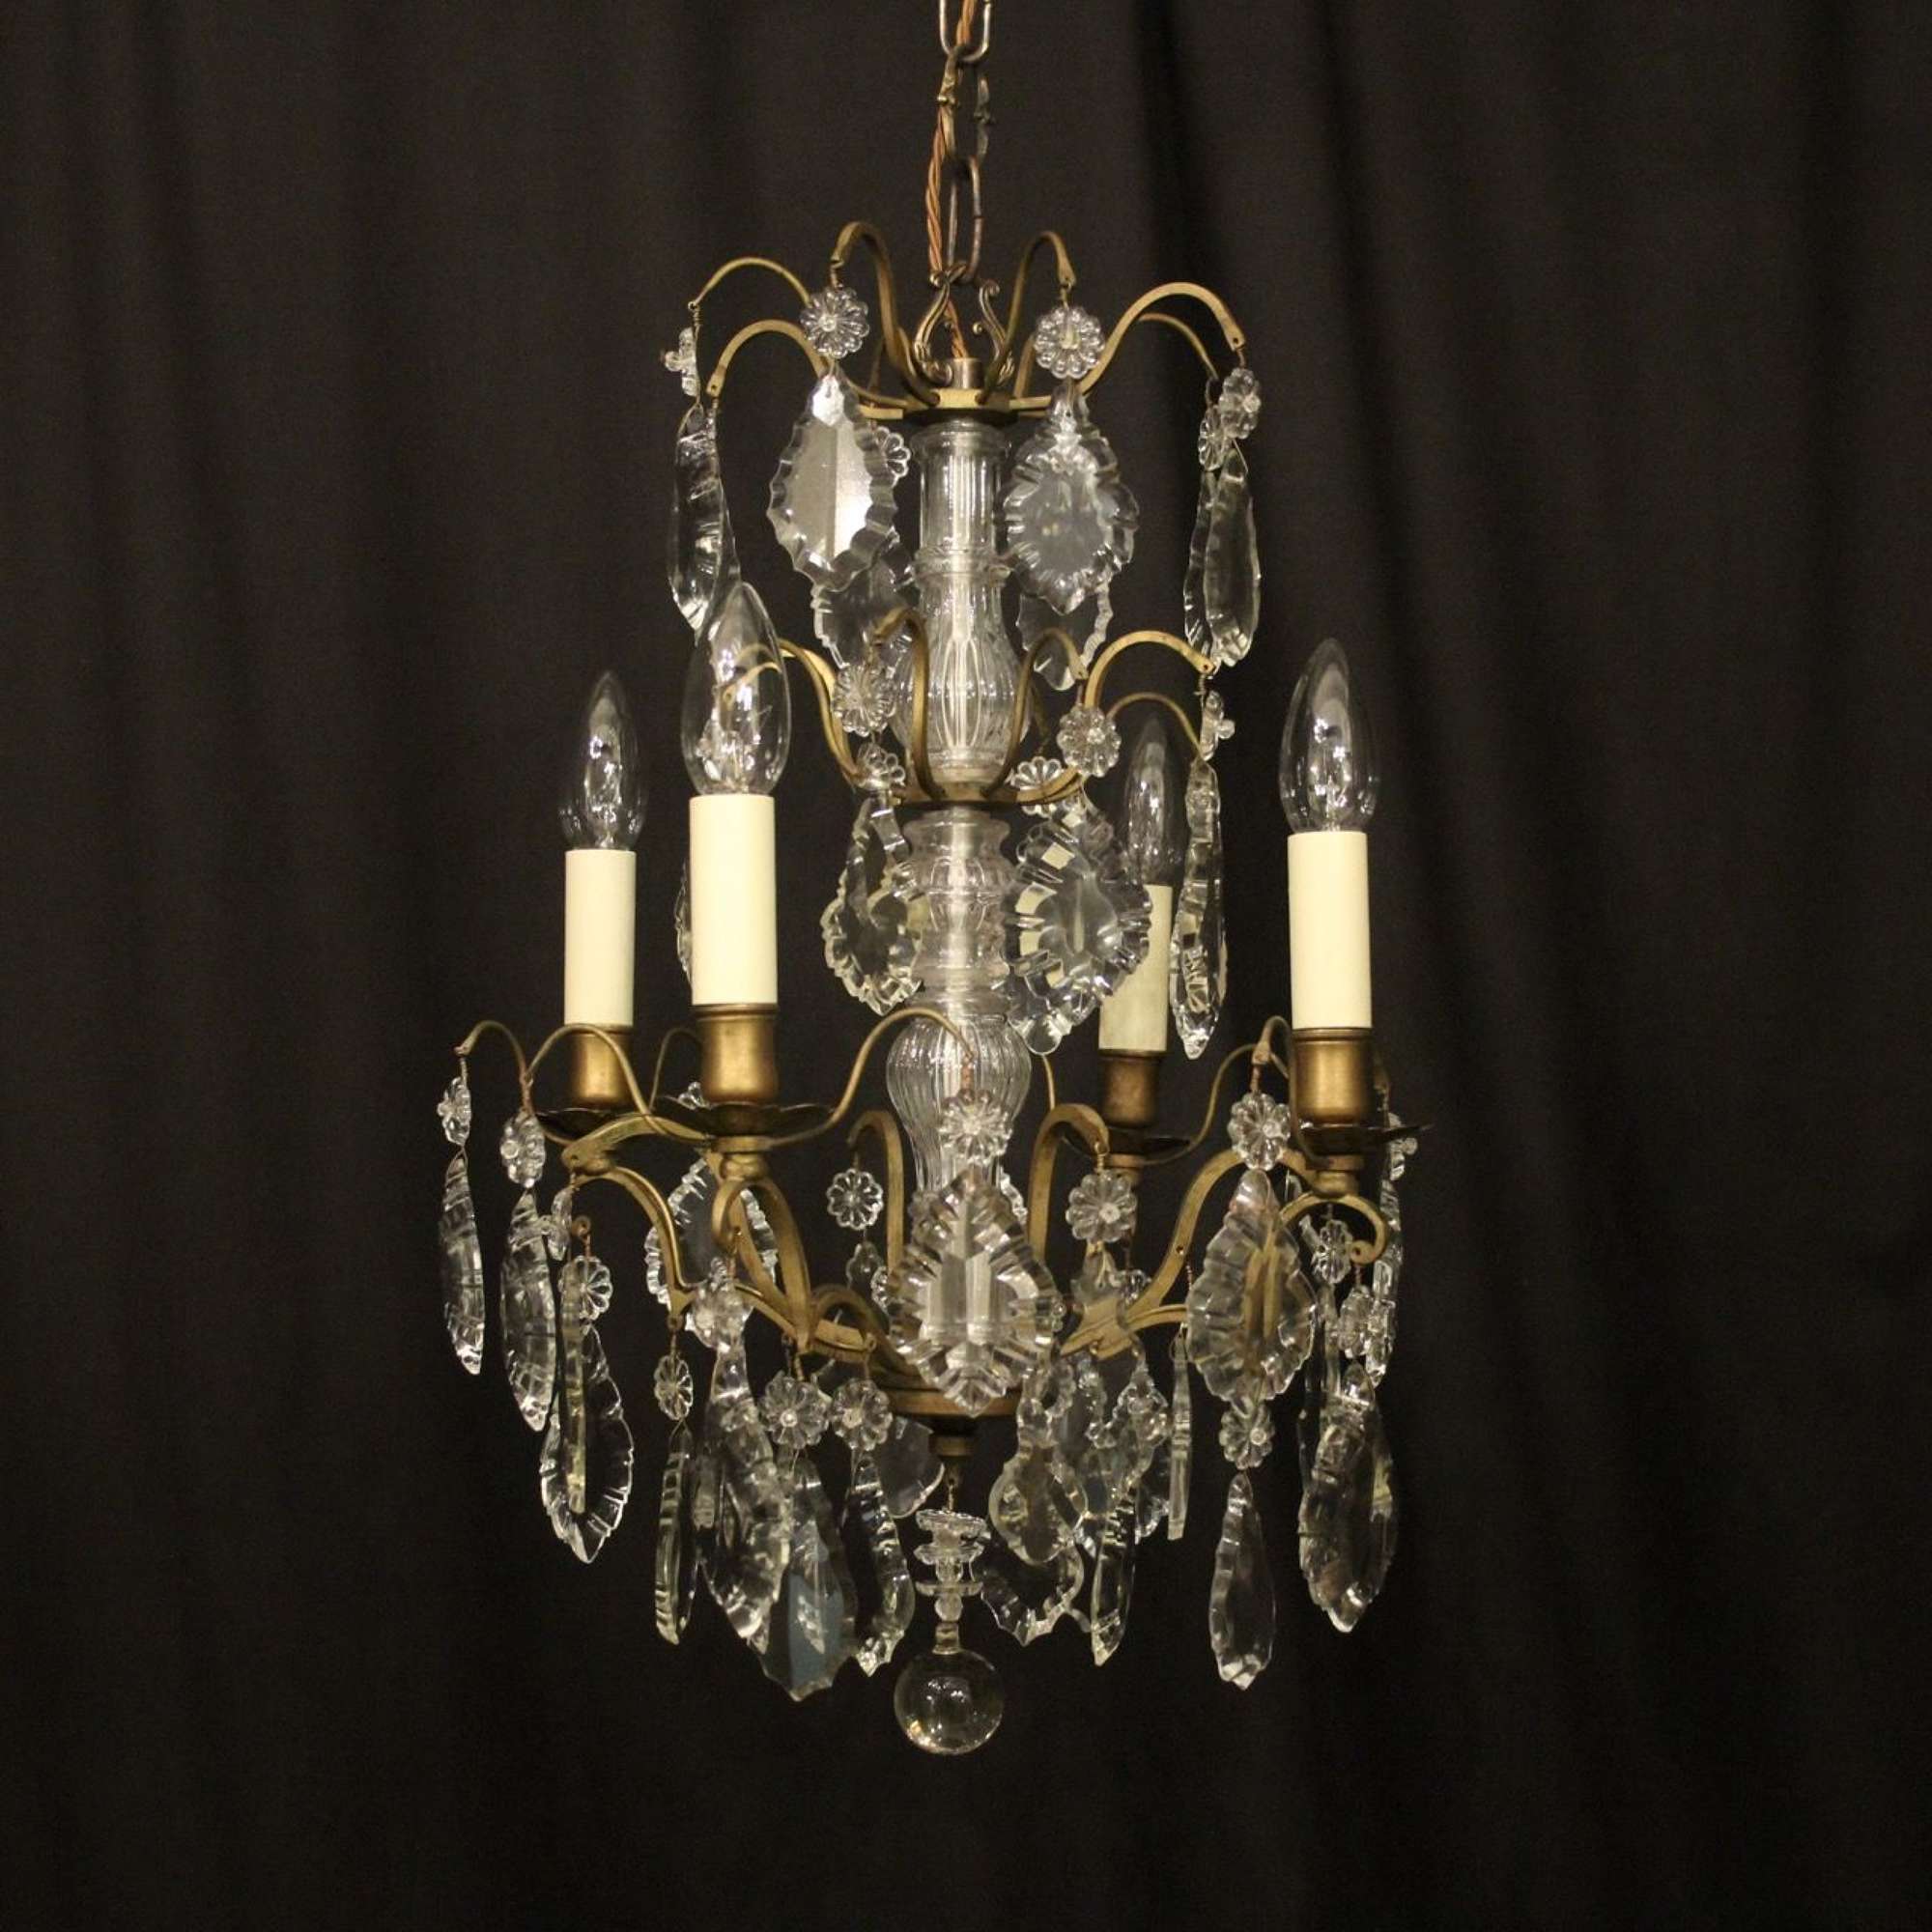 French Gilded 4 Light Antique Chandelier